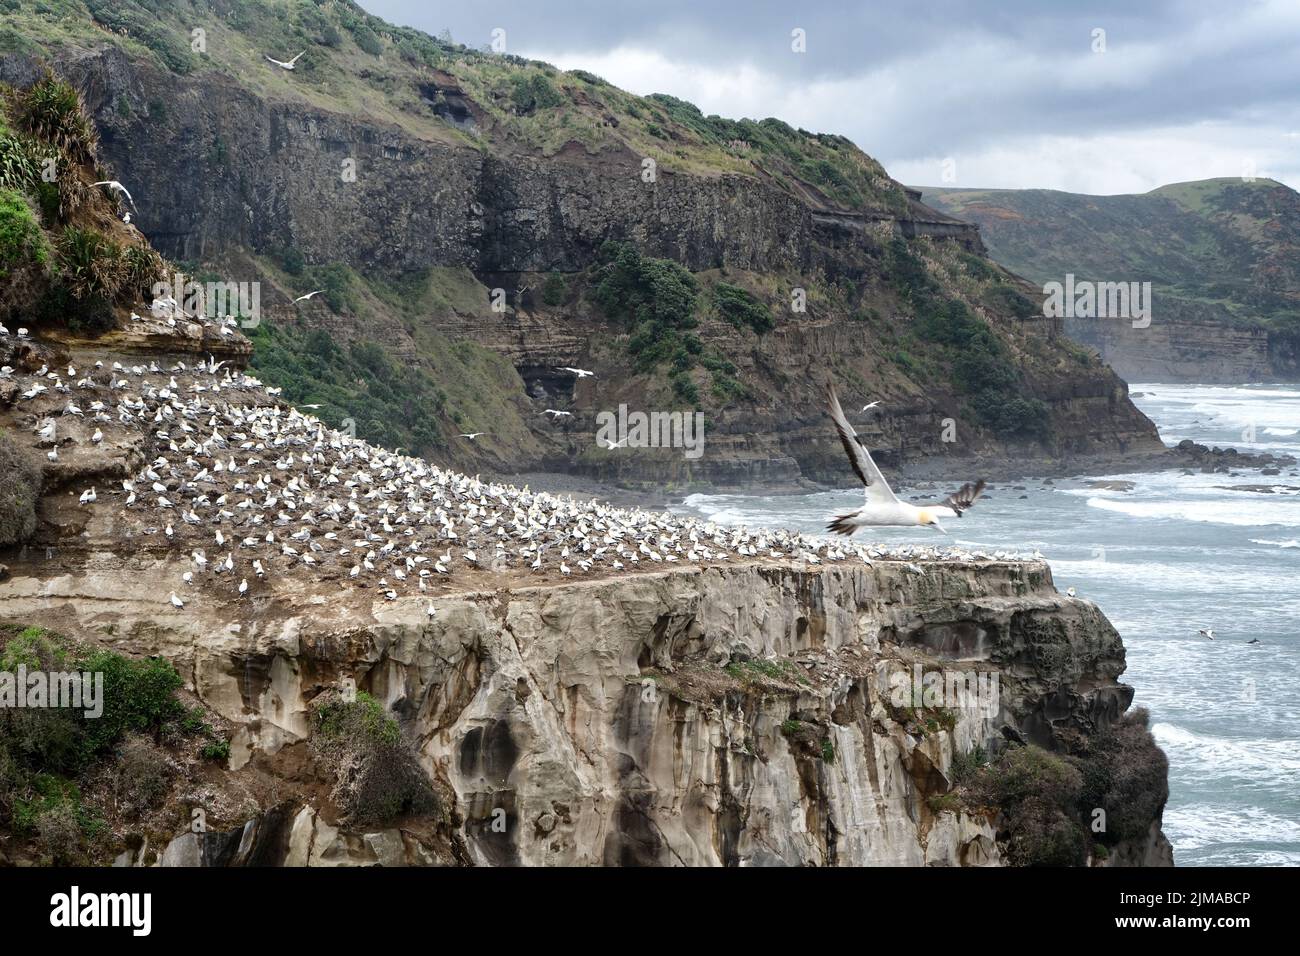 Adult gannets sitting on cliff of Pacific Ocean with waves in background Stock Photo